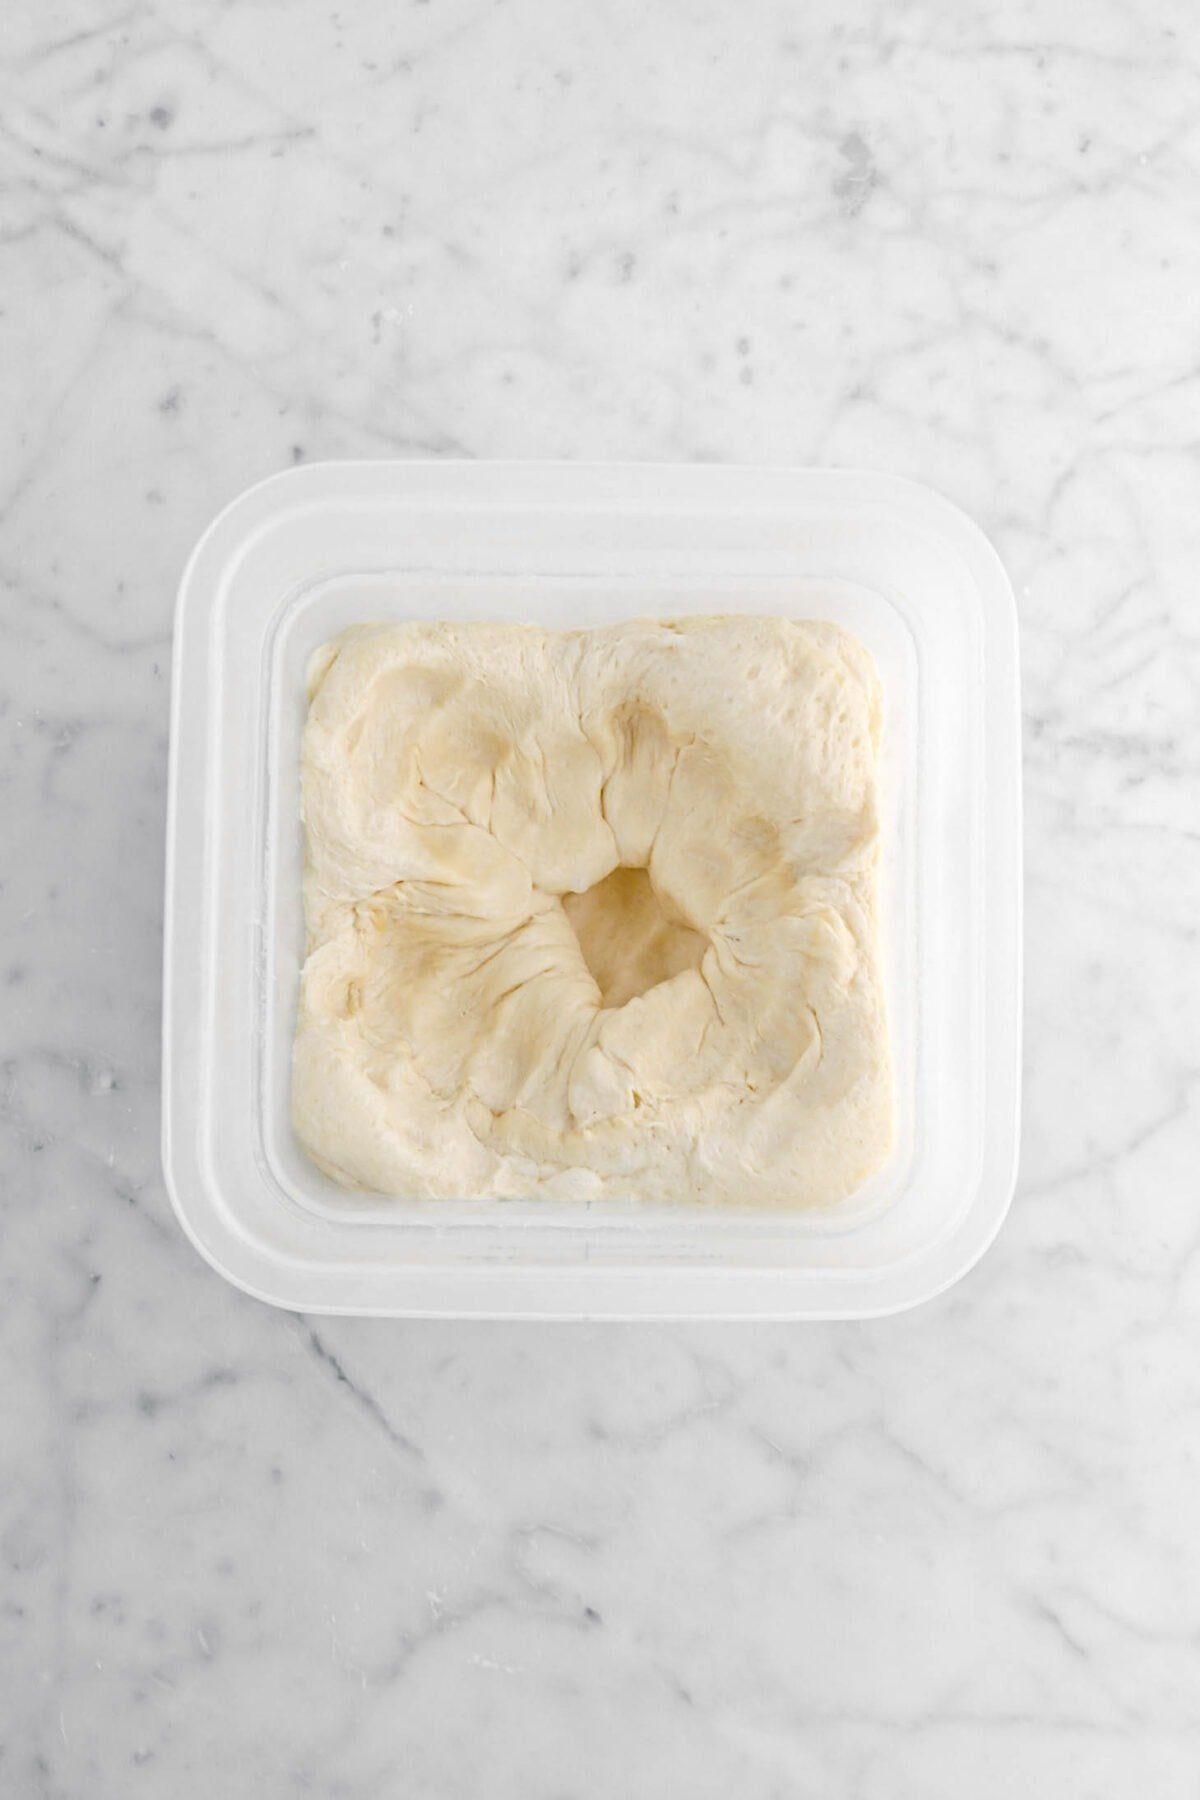 punched down dough in plastic container.